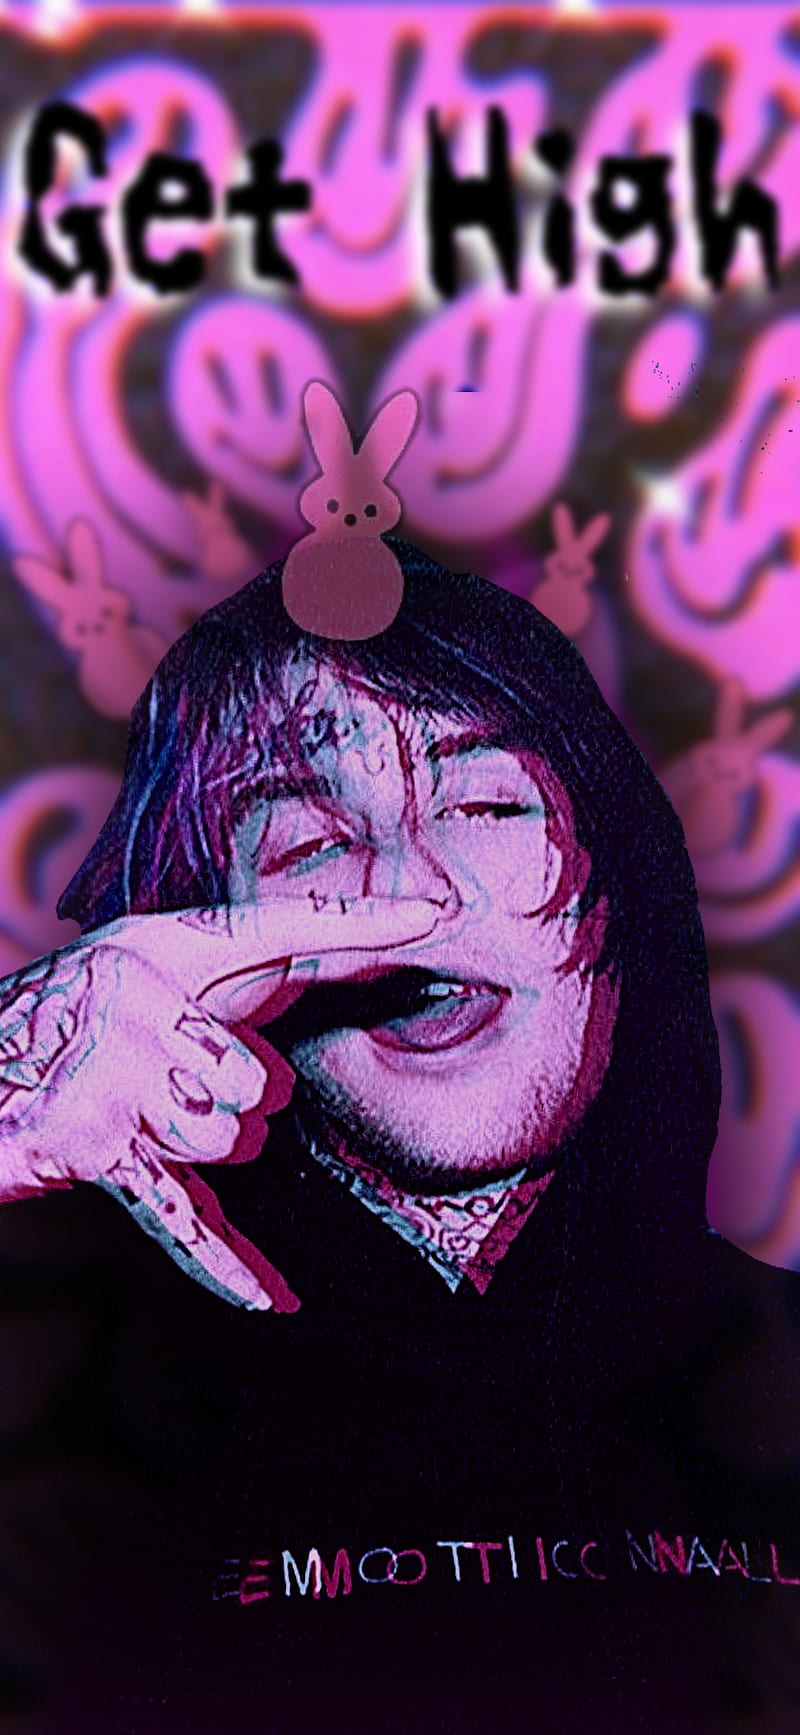 A photo of a man with a bunny on his head and the words get high - Lil Peep